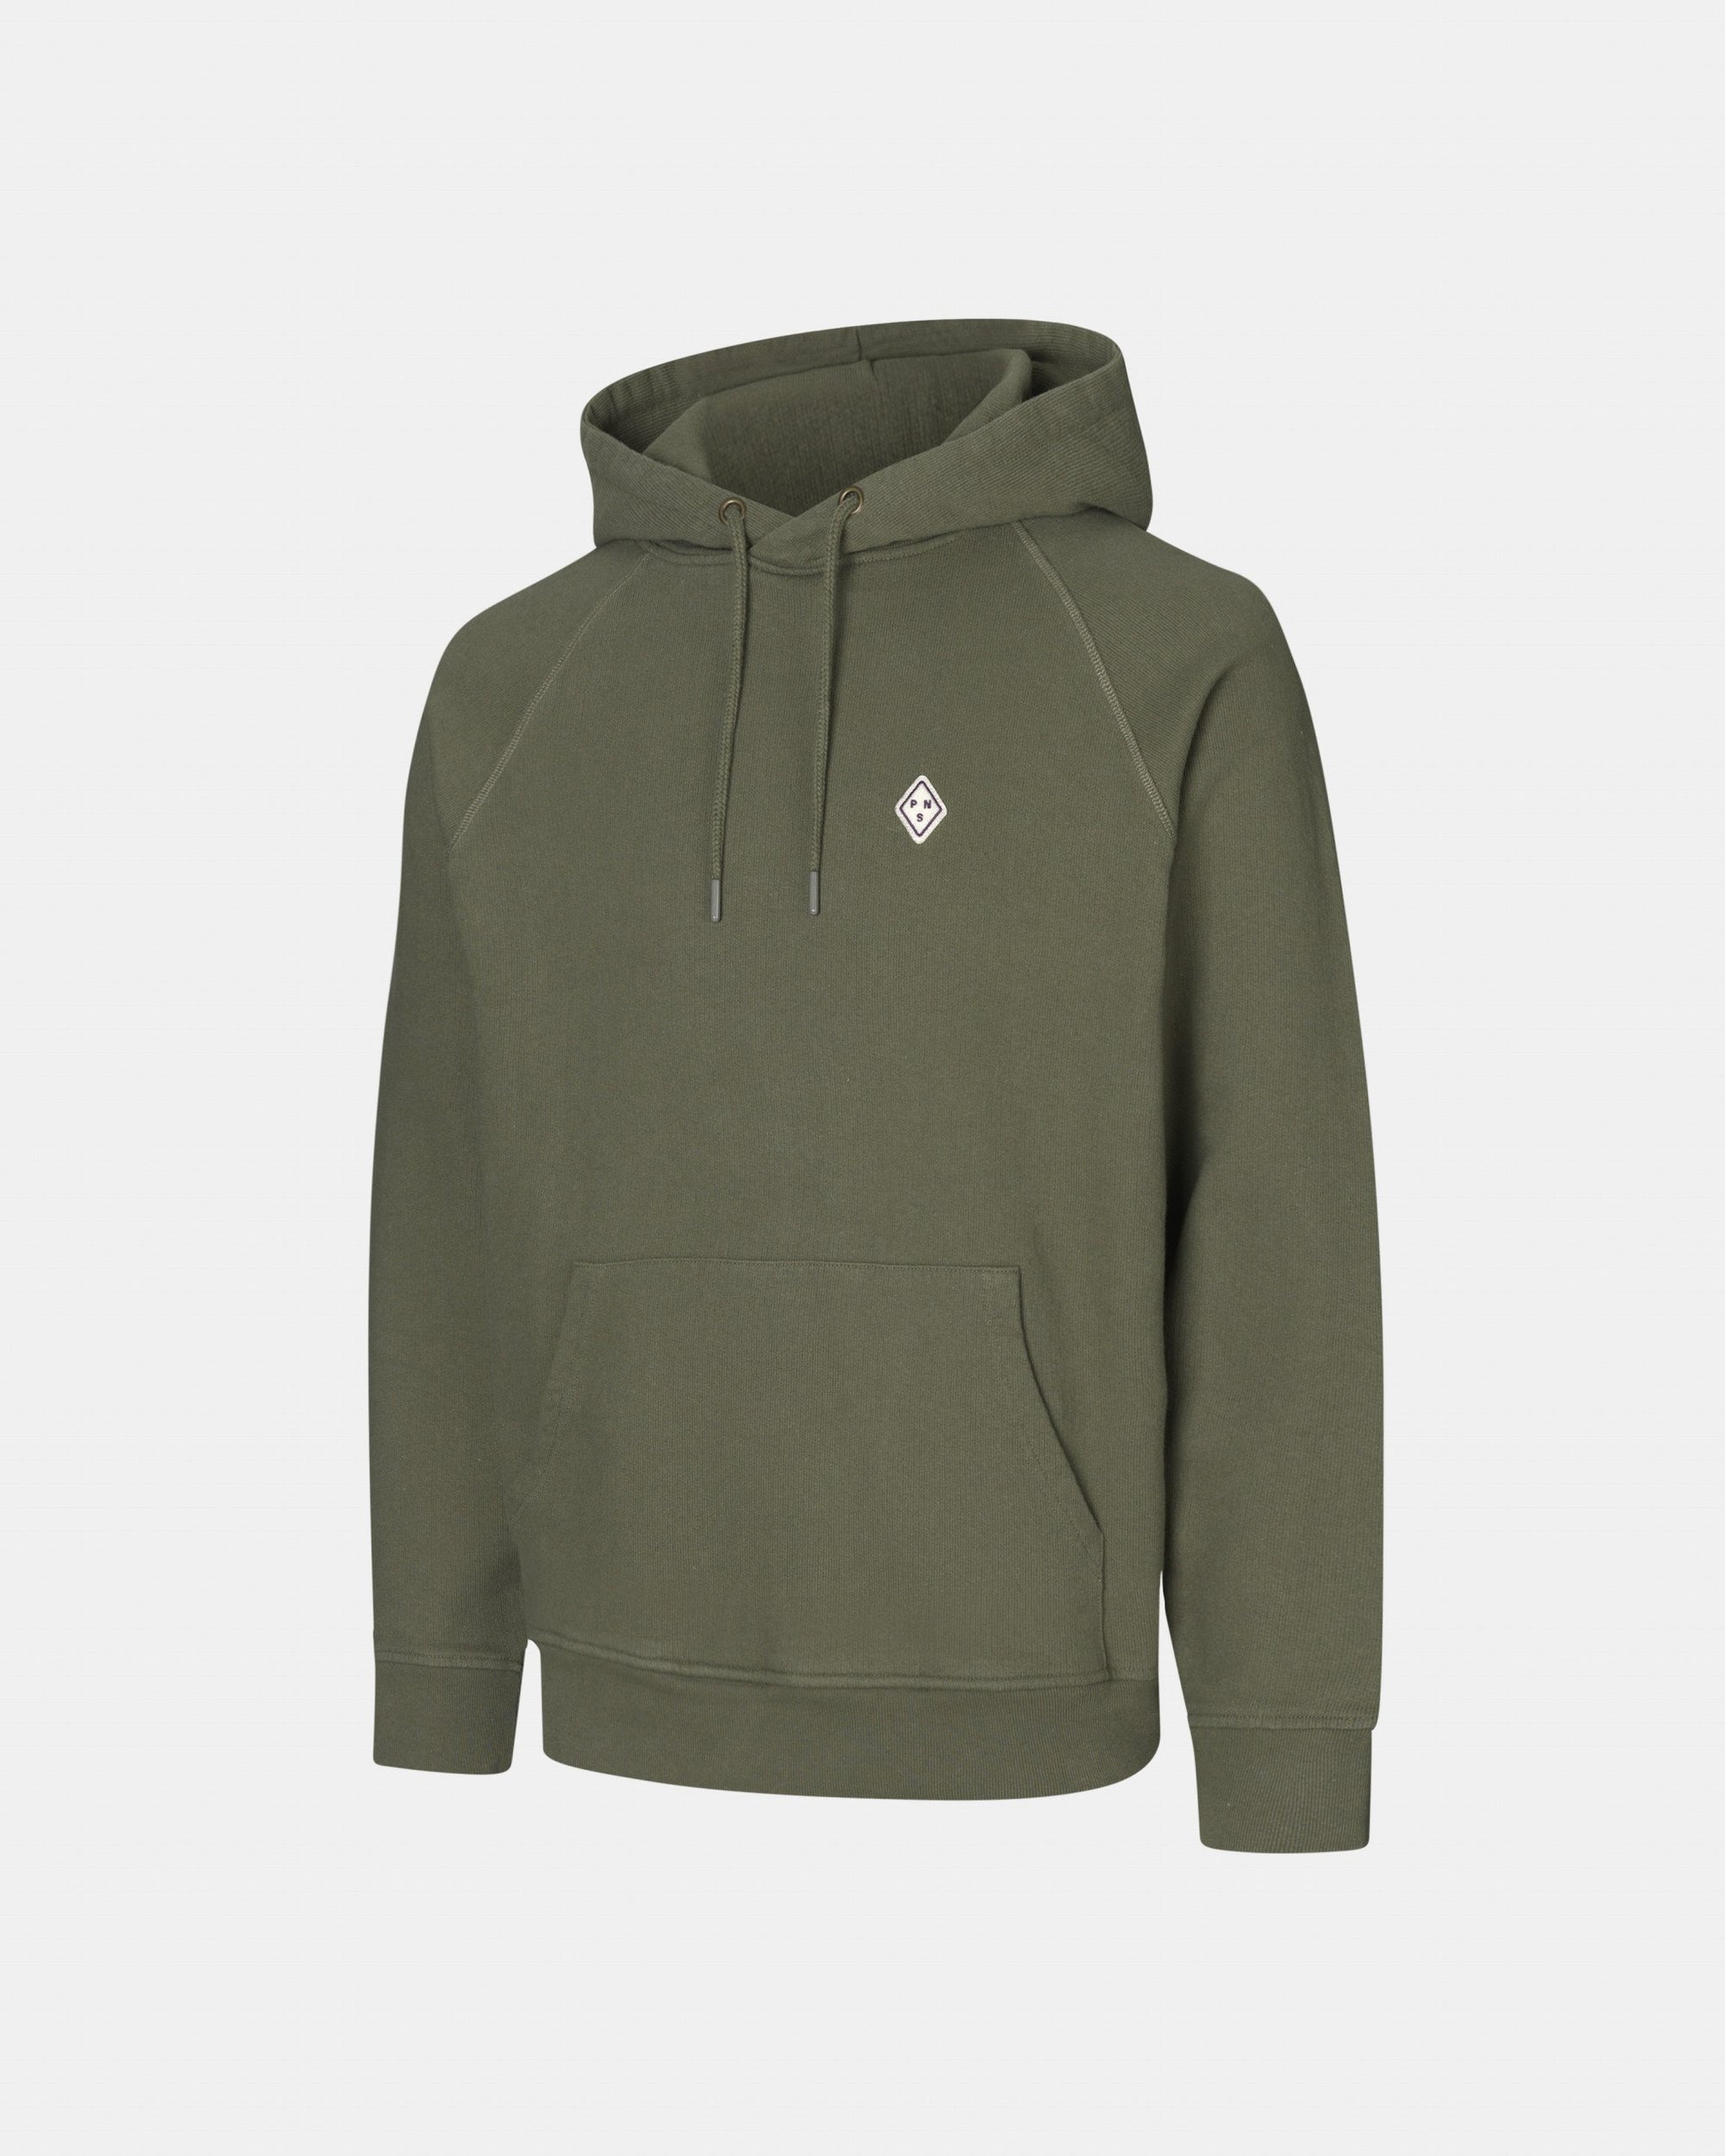 PAS NORMAL STUDIOS Off-Race Patch Hoodie - Dusty Olive